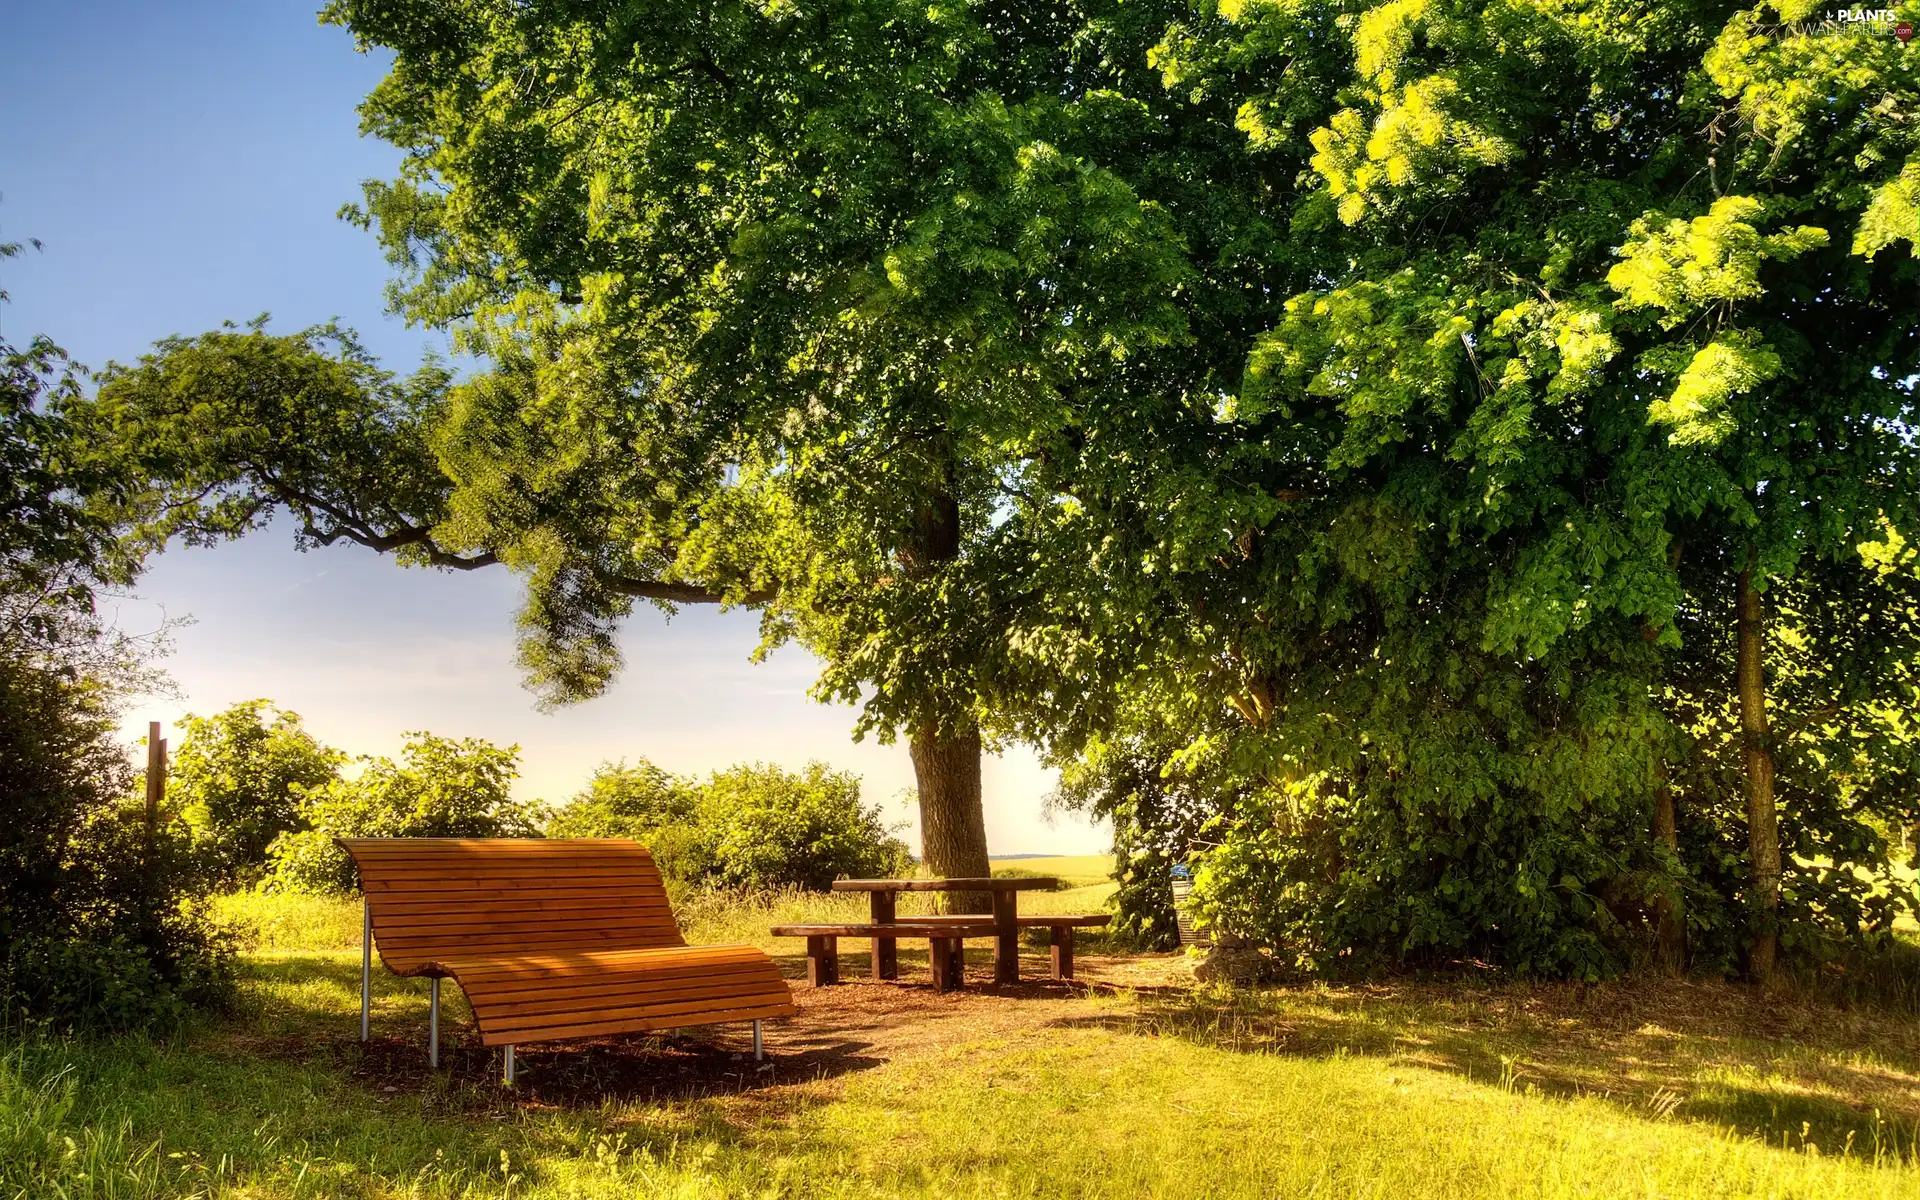 Meadow, viewes, Bench, trees